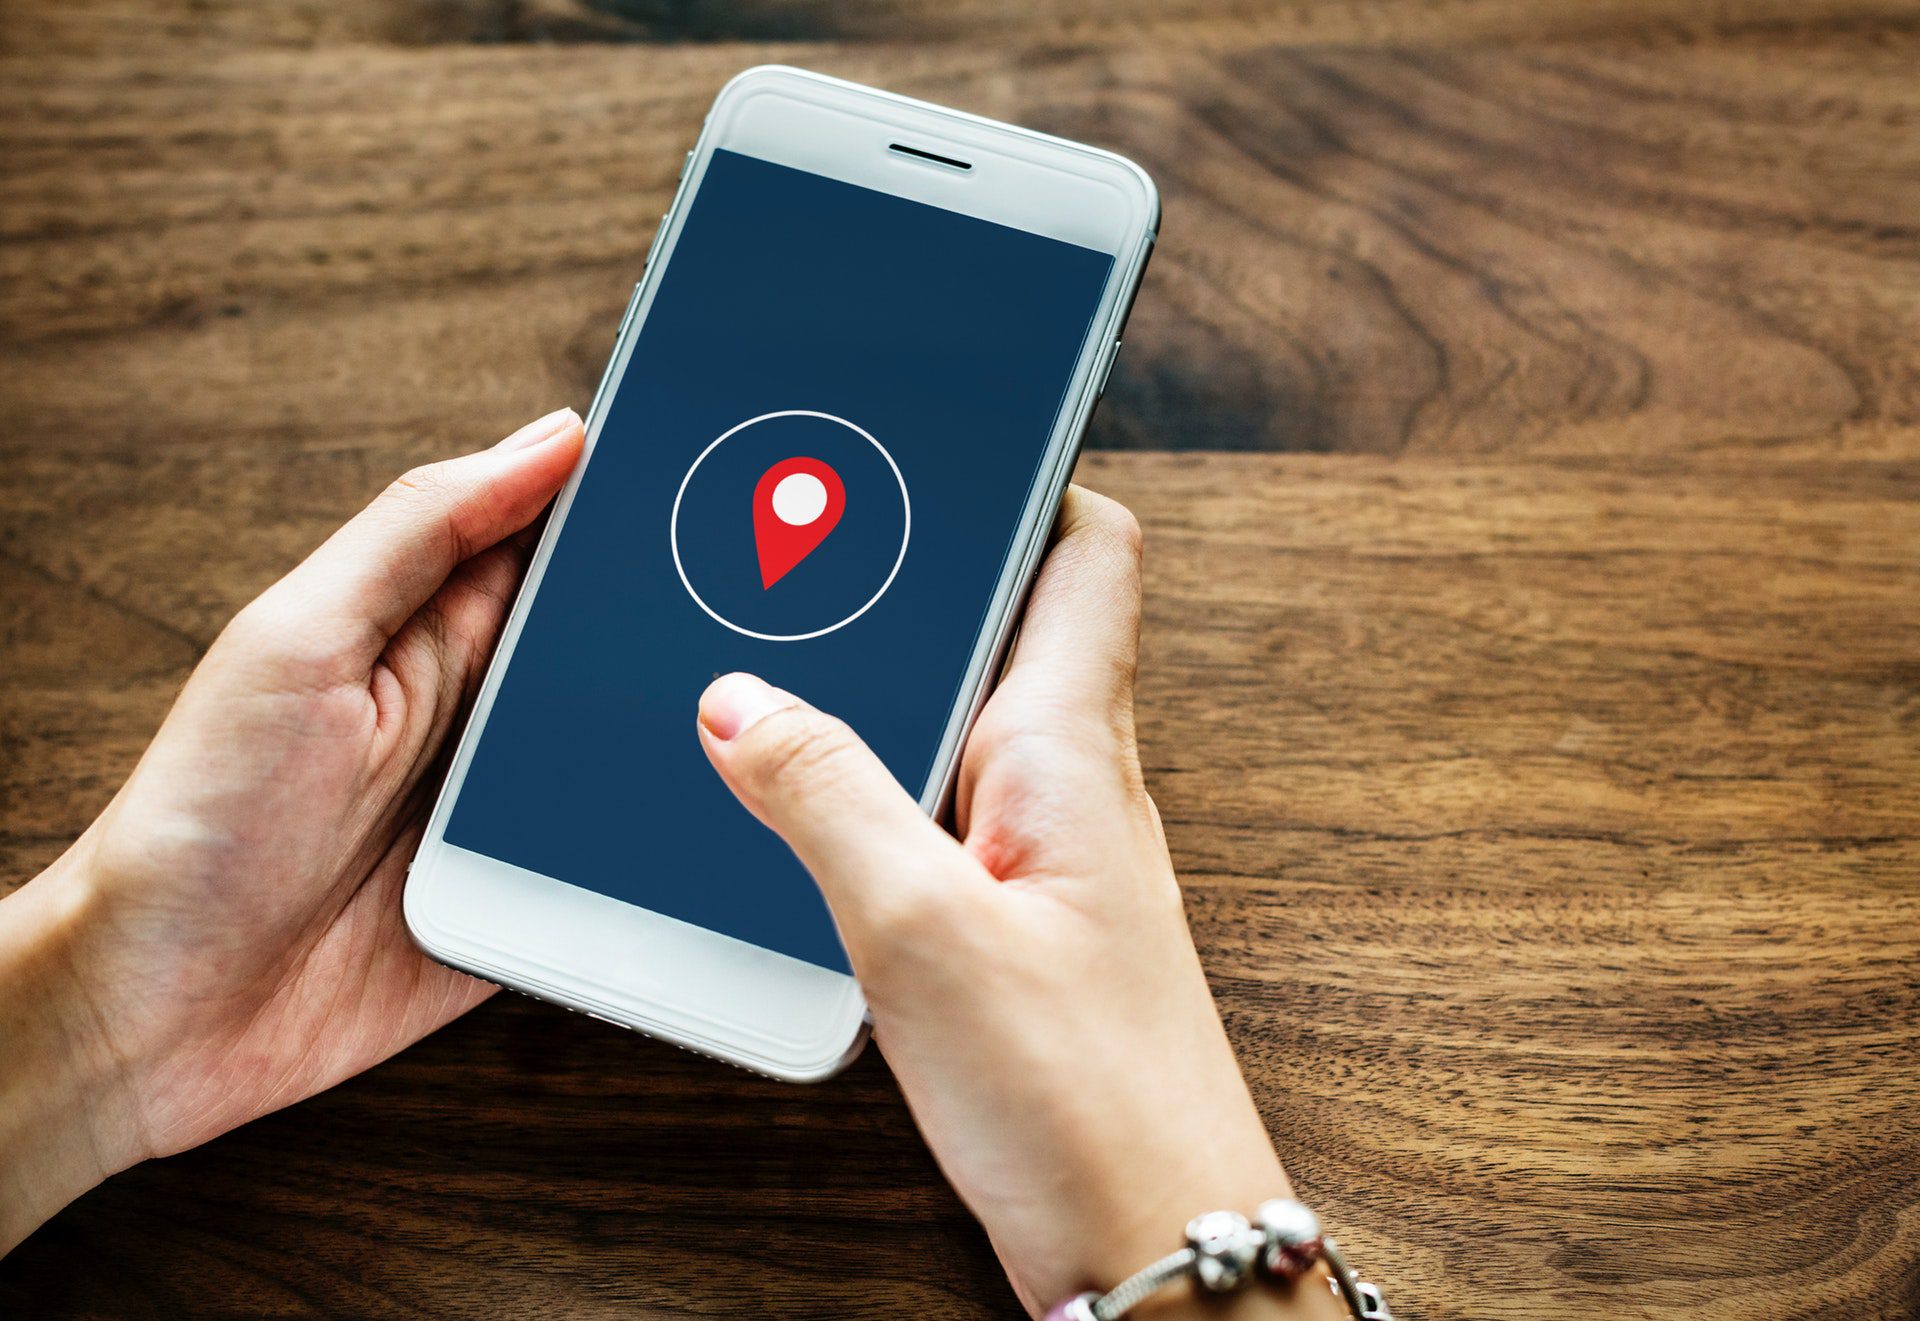 5 Best Ways to Track a Cell Phone Location